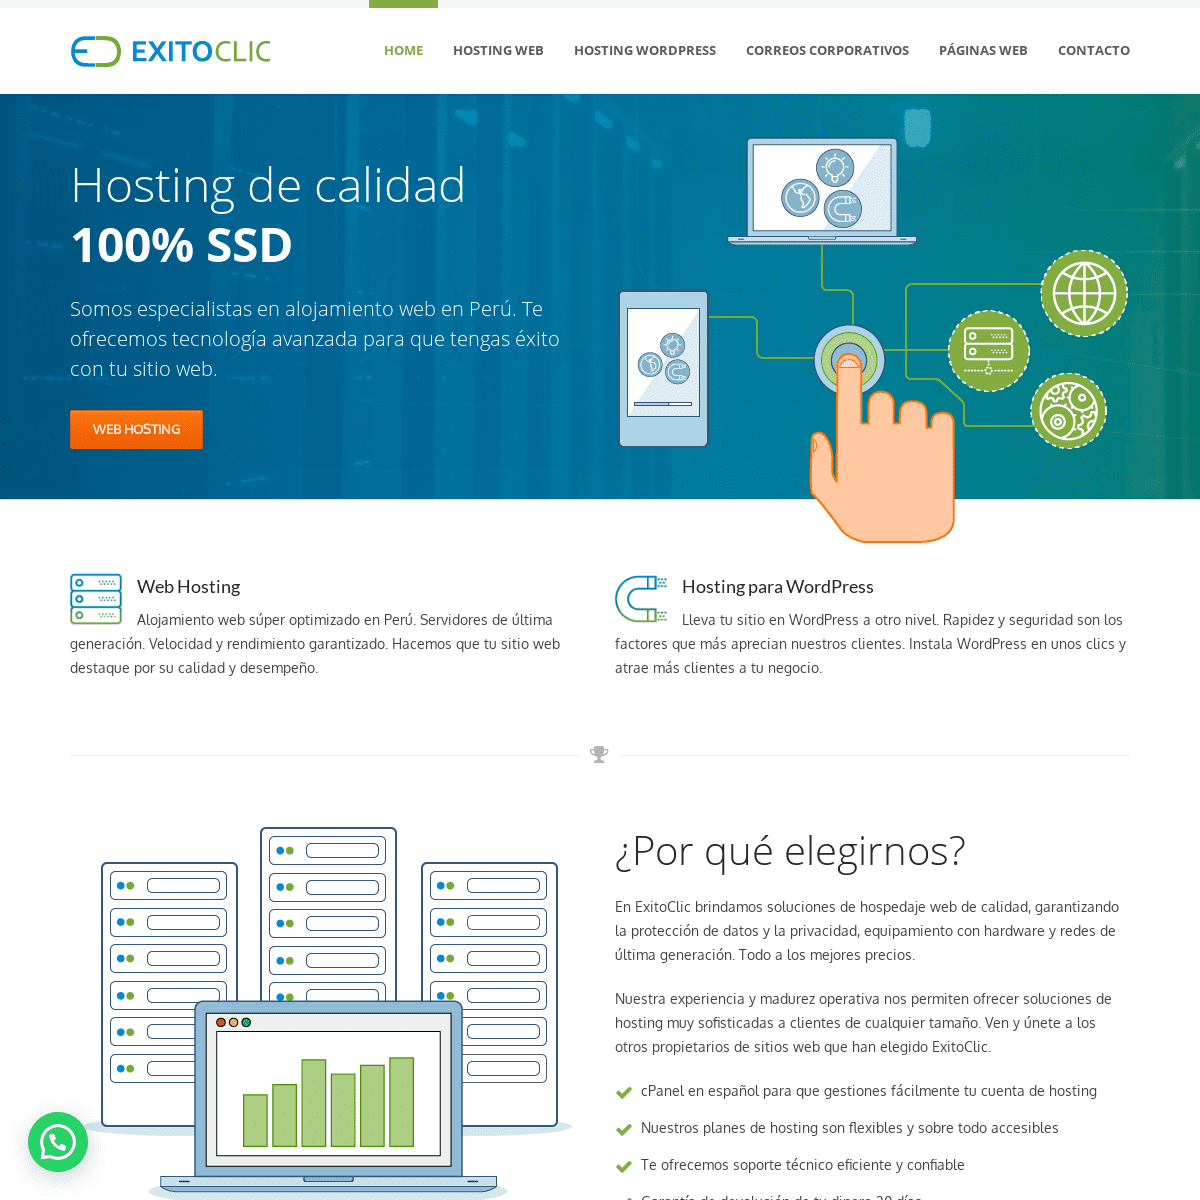 A complete backup of exitoclic.com